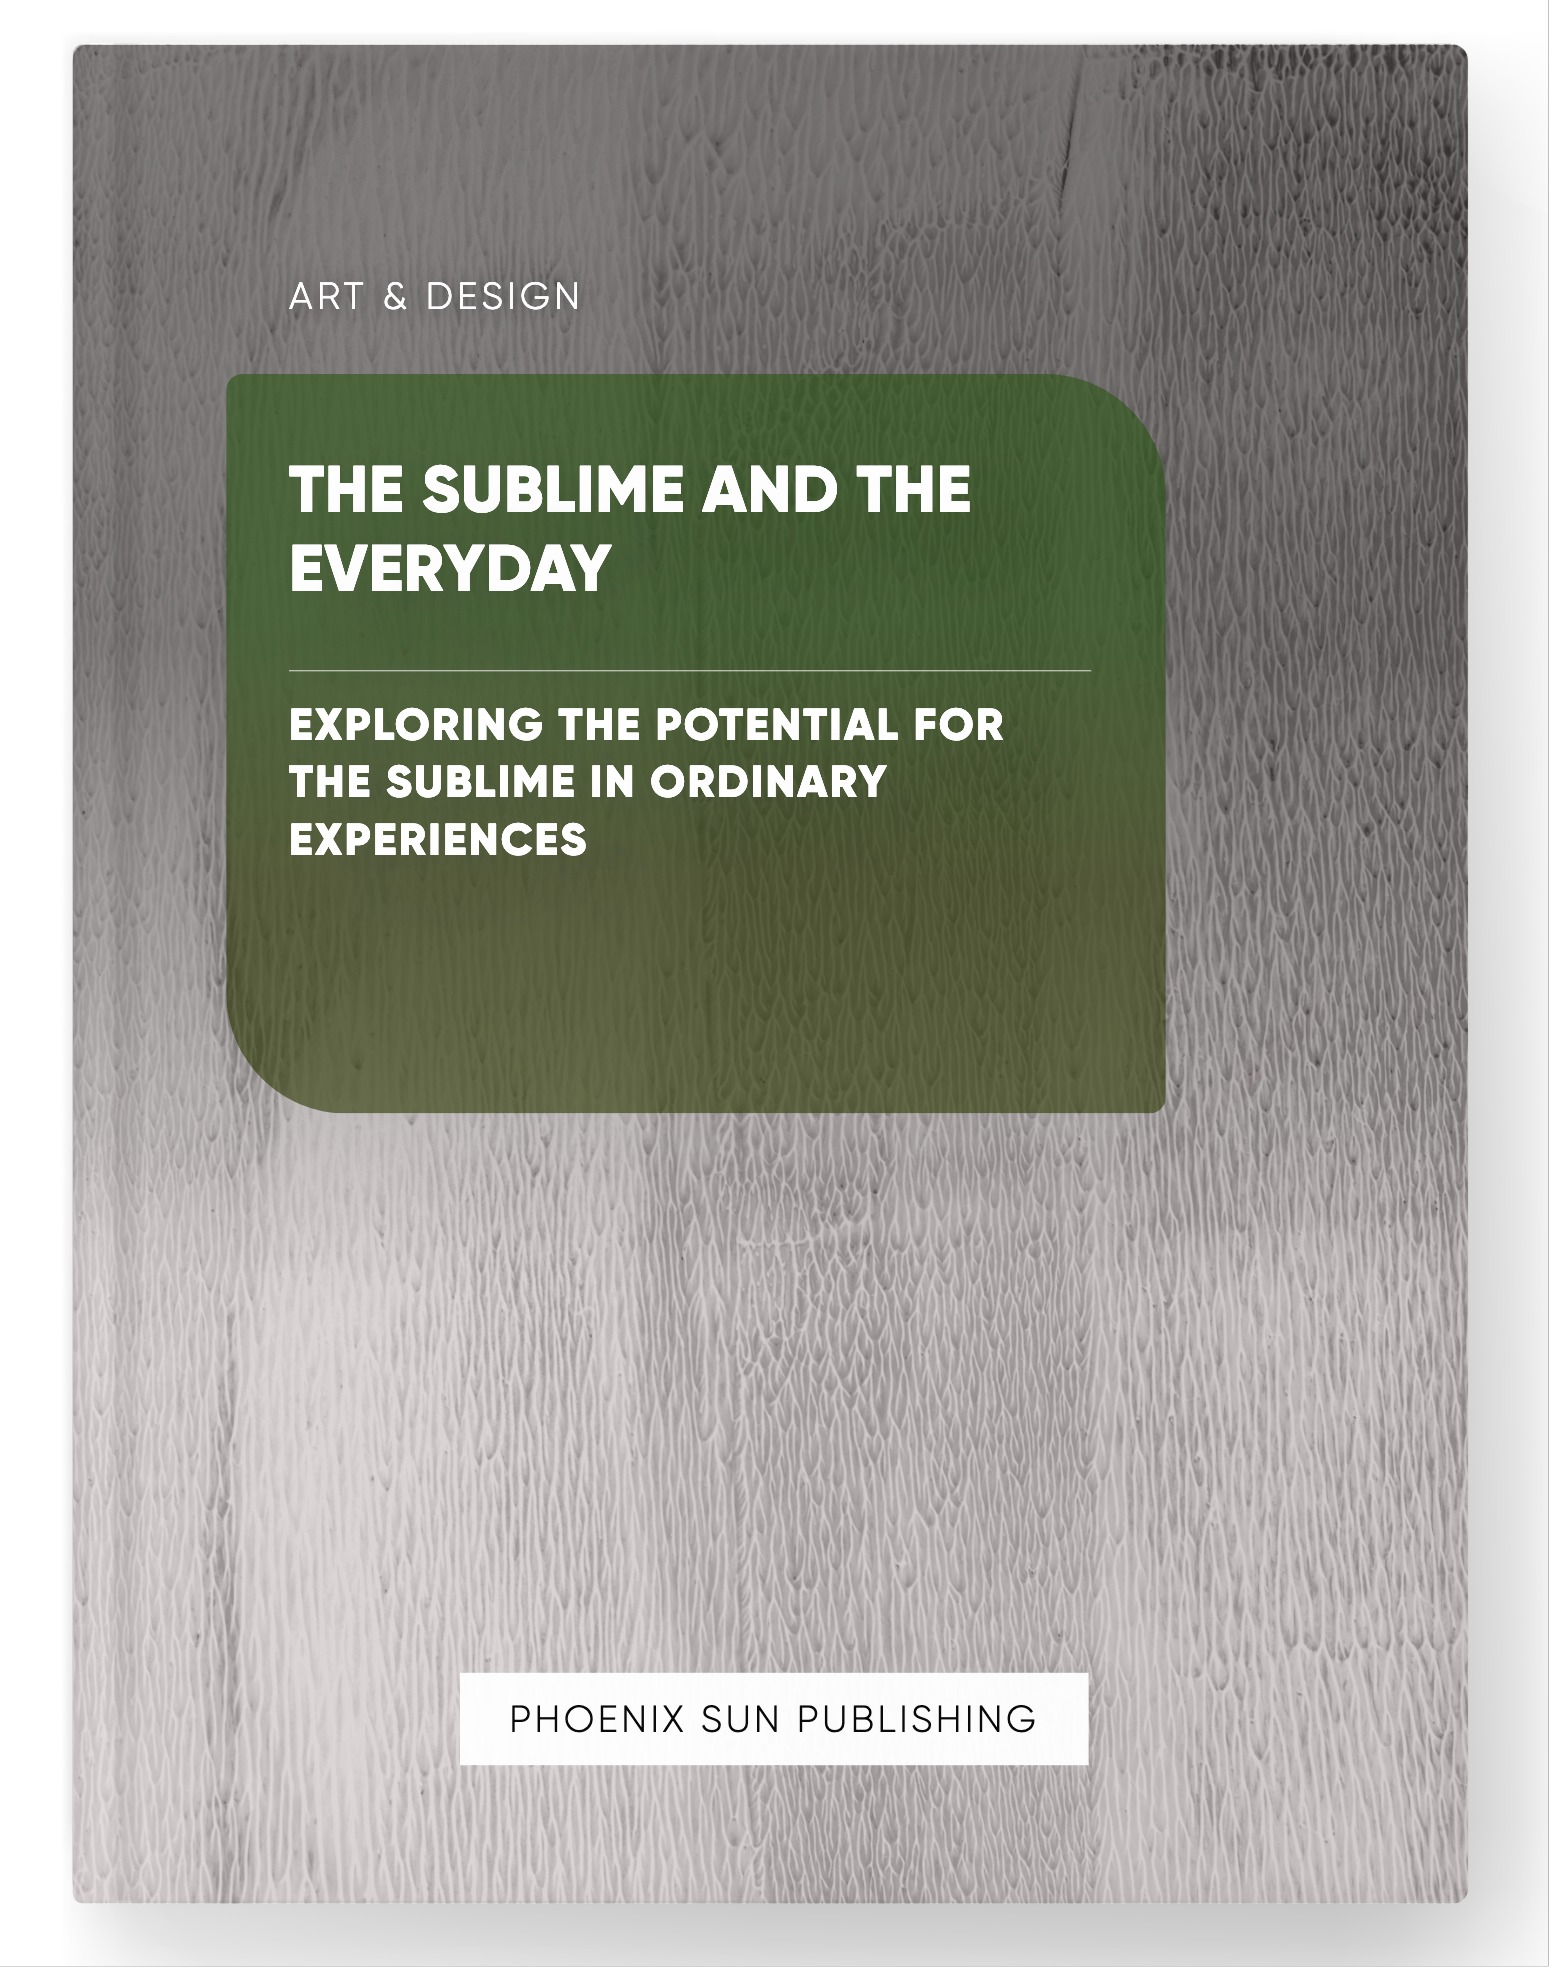 The Sublime and the Everyday – Exploring the Potential for the Sublime in Ordinary Experiences